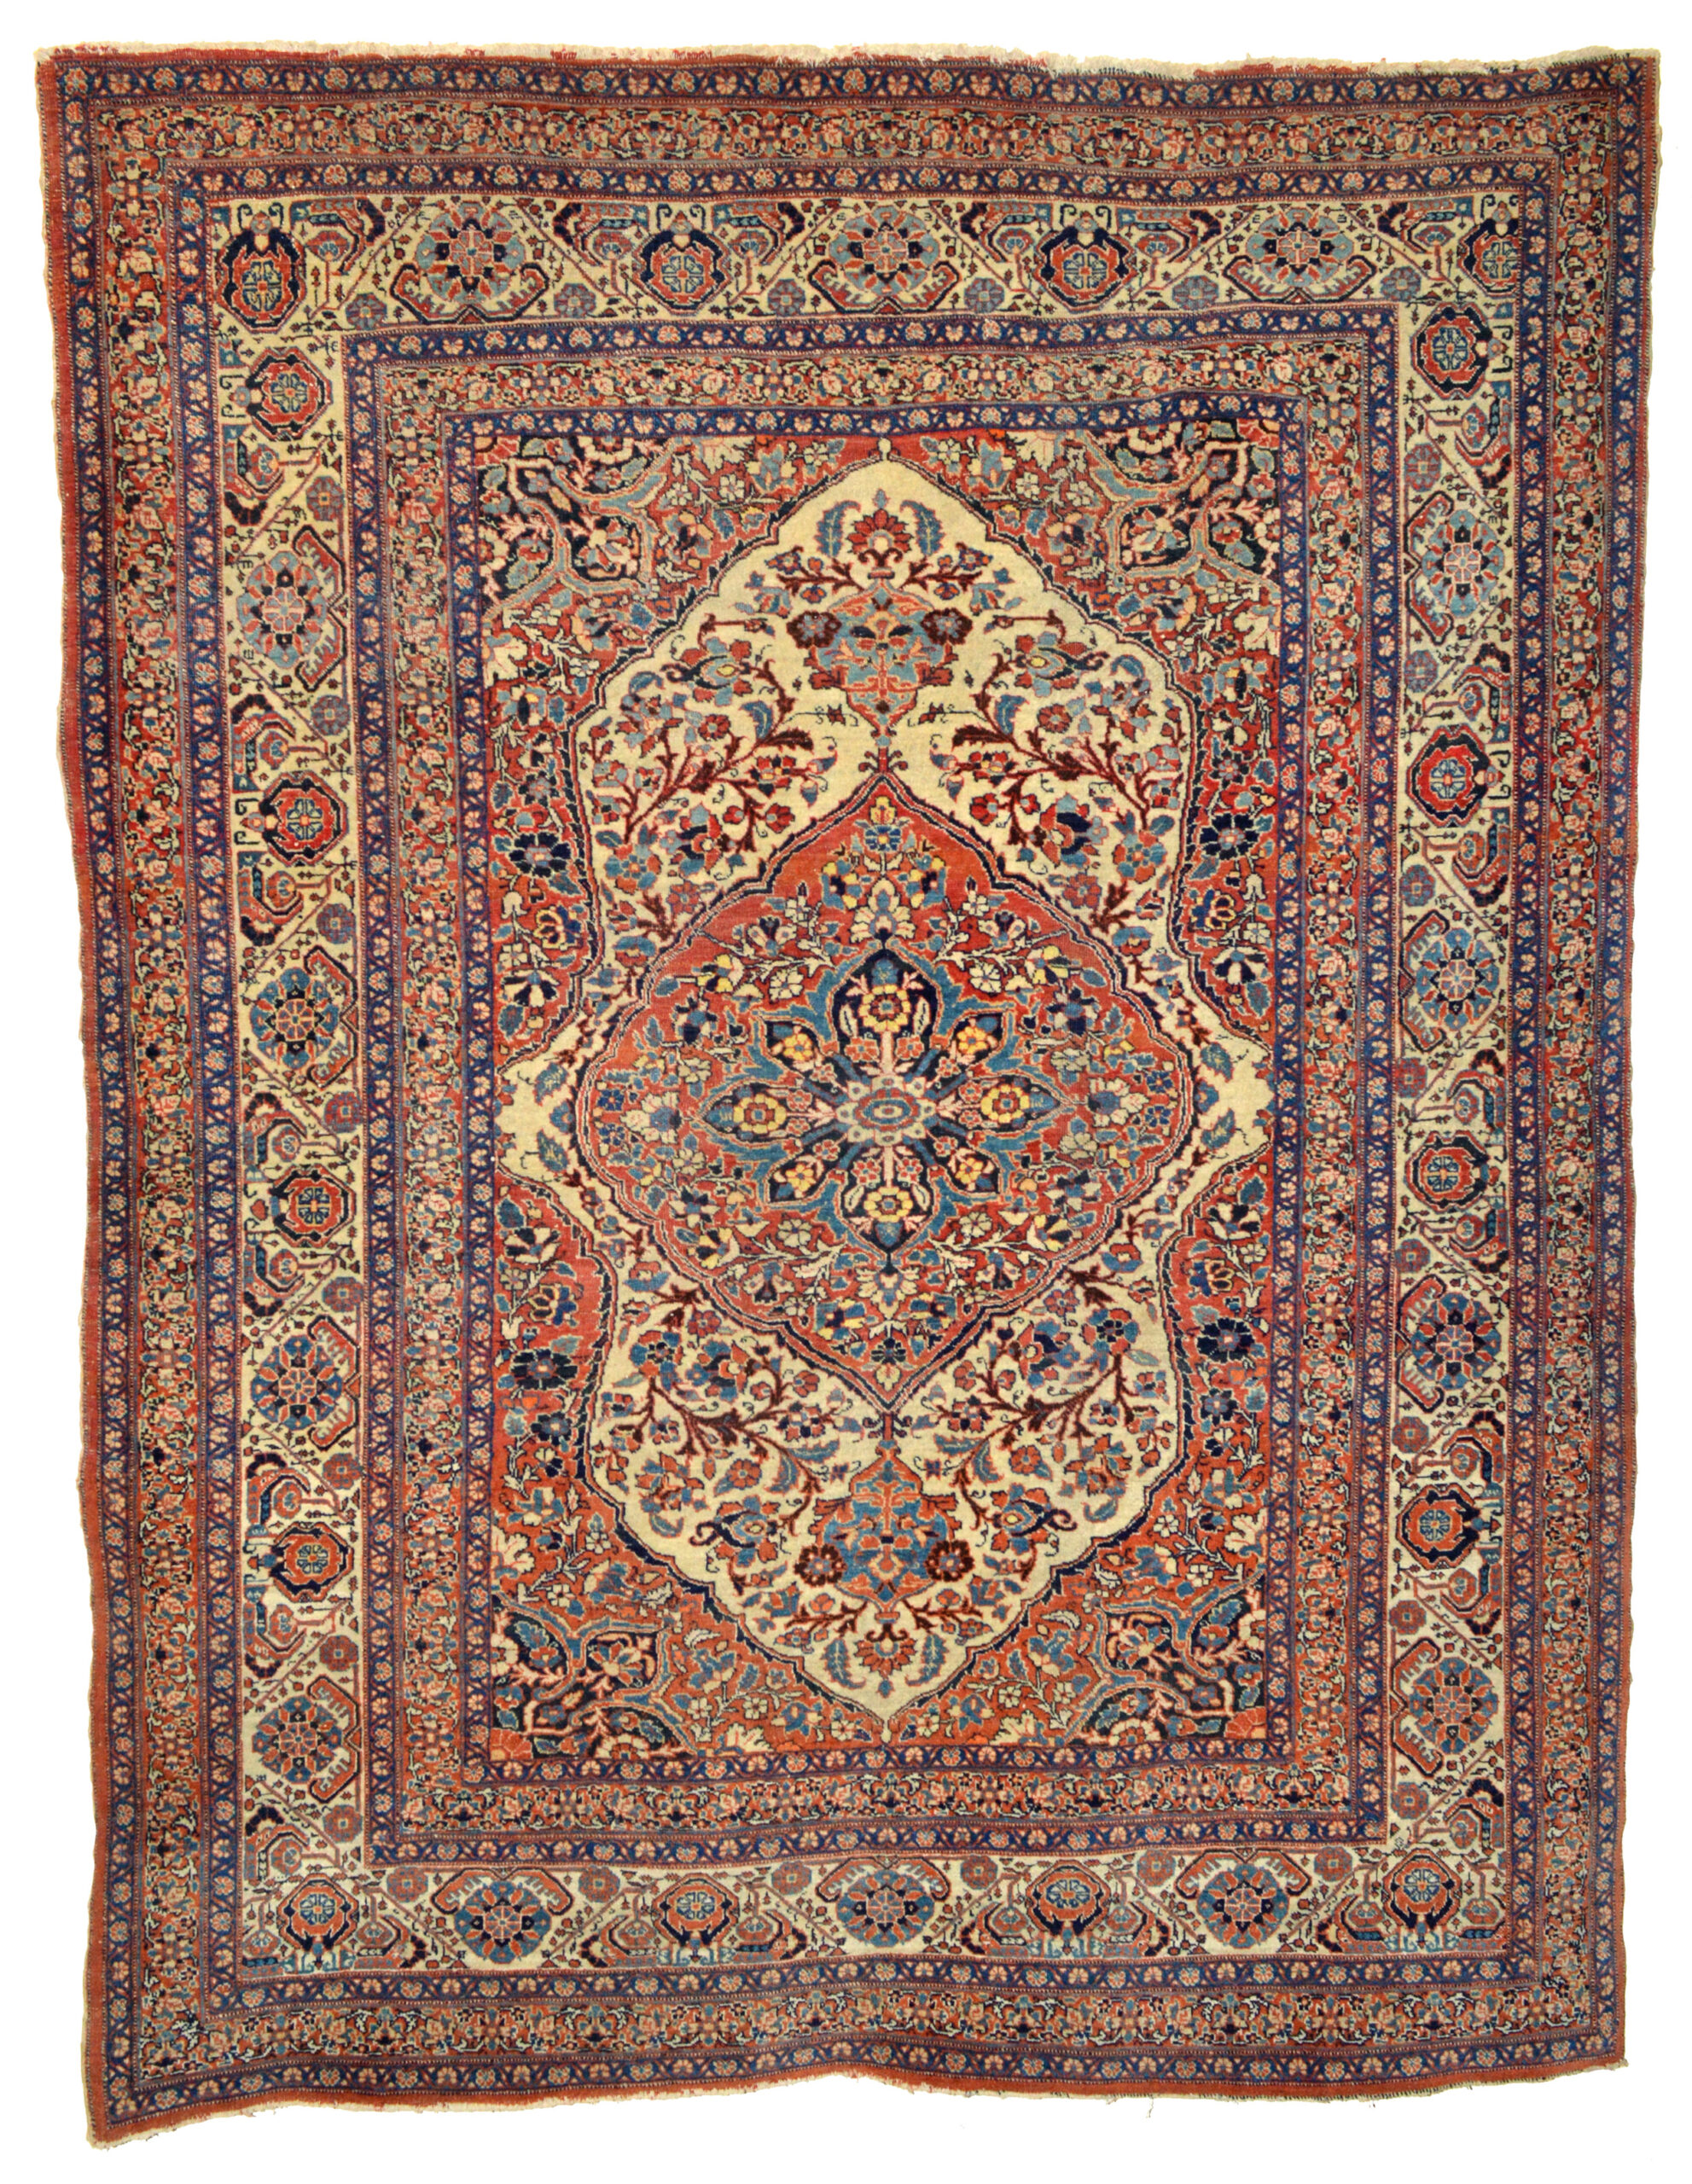 An antique Tabriz rug with an ivory field, northwest Persia, circa 1915. Douglas Stock Gallery, antique Oriental rugs Boston, Brookline, Newton, Weston, Wellesley, Natick,MA area, antique rugs New England, antique rugs New York, Antique rugs Washington DC